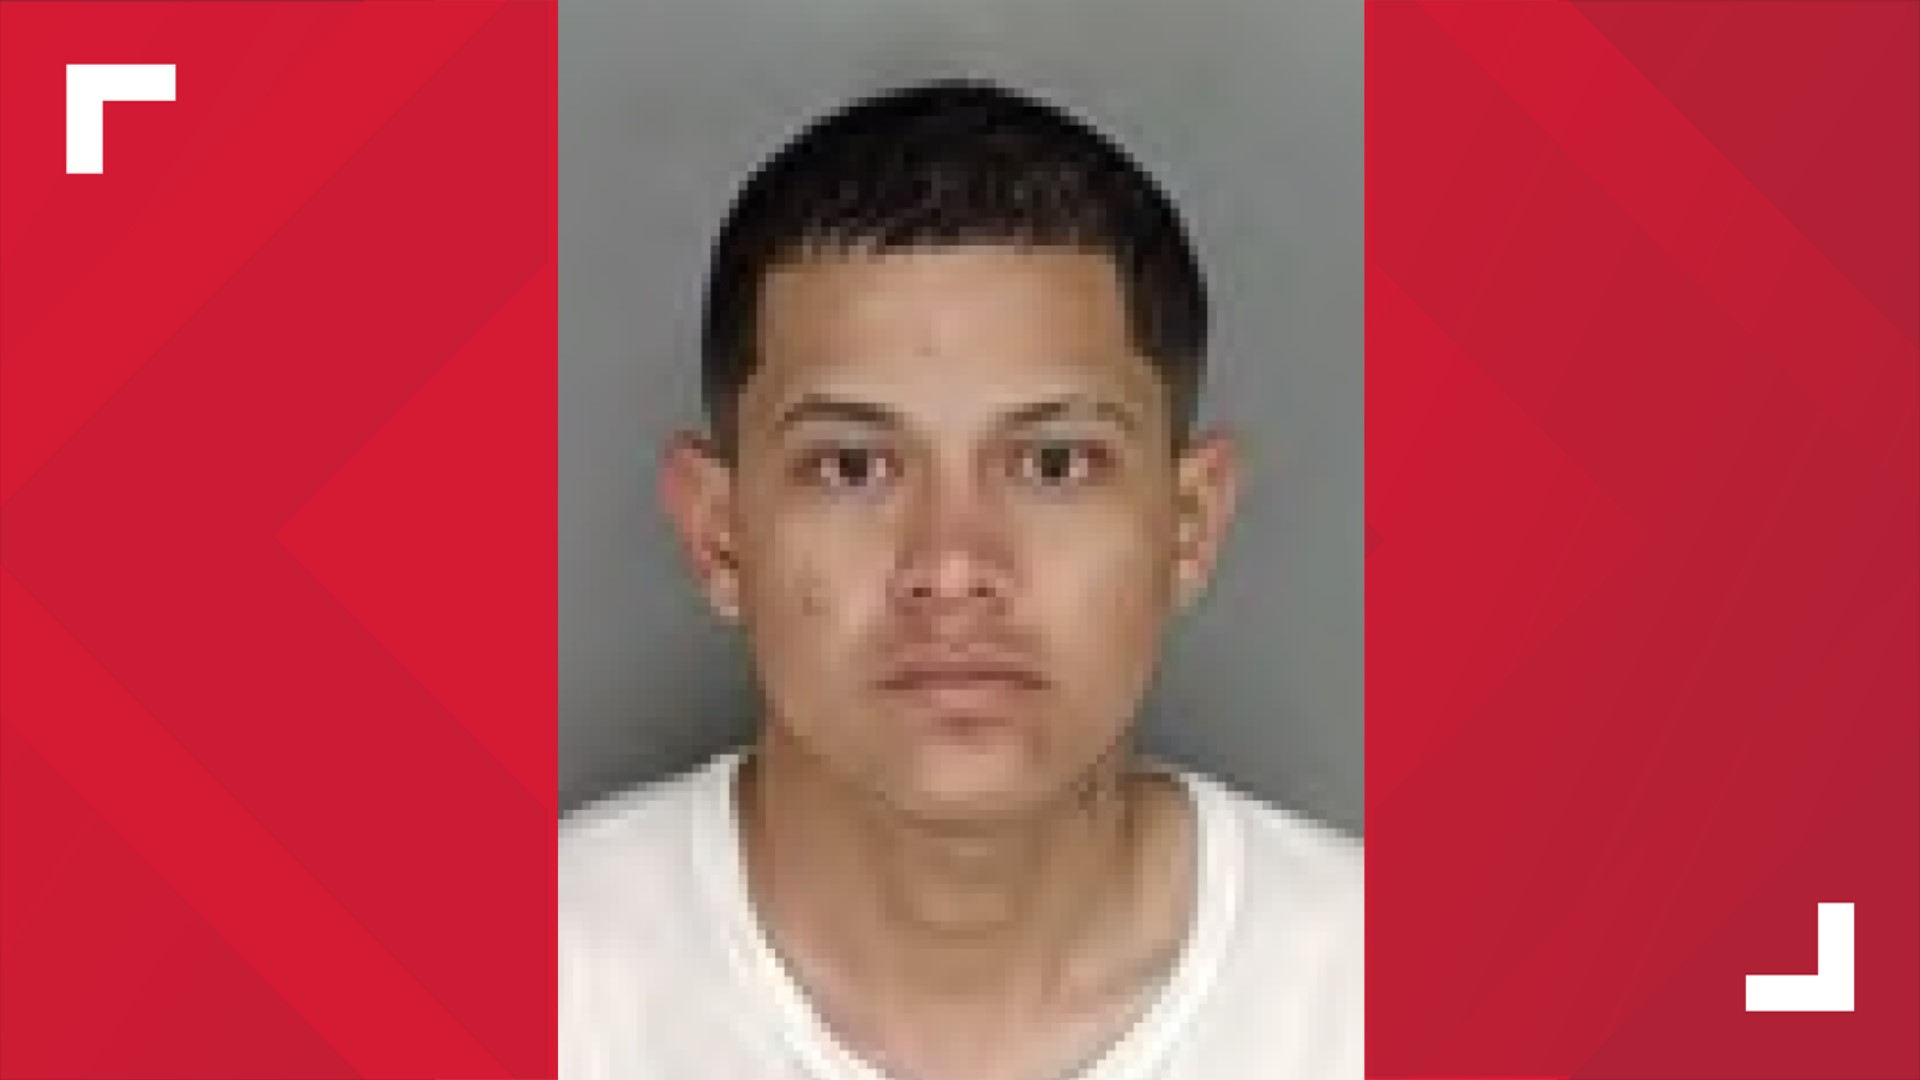 The suspect, identified as 24-year-old Jose Castro, has been arrested and is in custody the Summit County Jail.